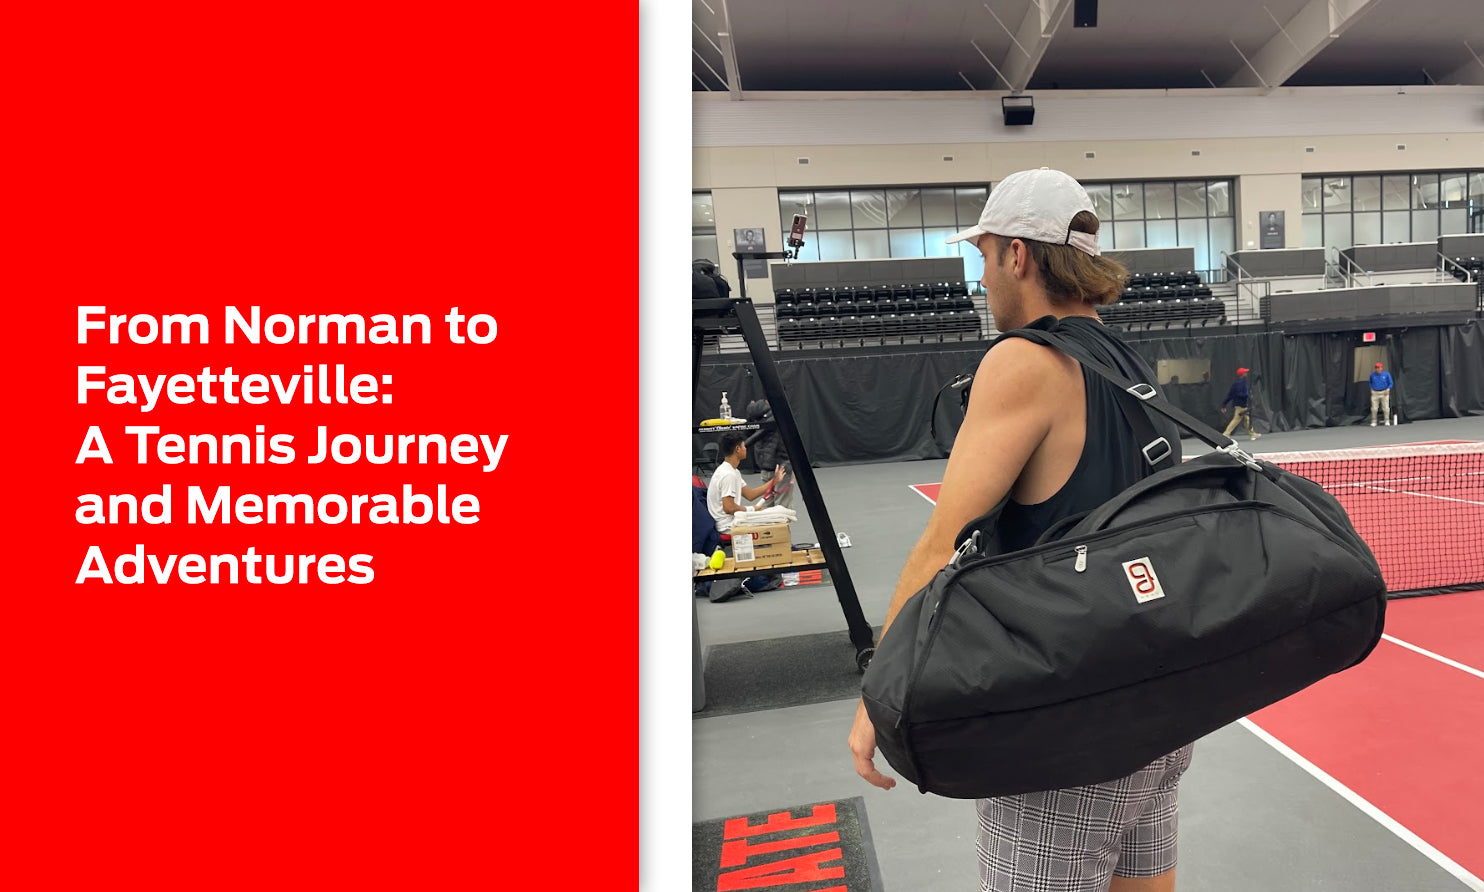 From Norman to Fayetteville: A Tennis Journey and Memorable Adventures